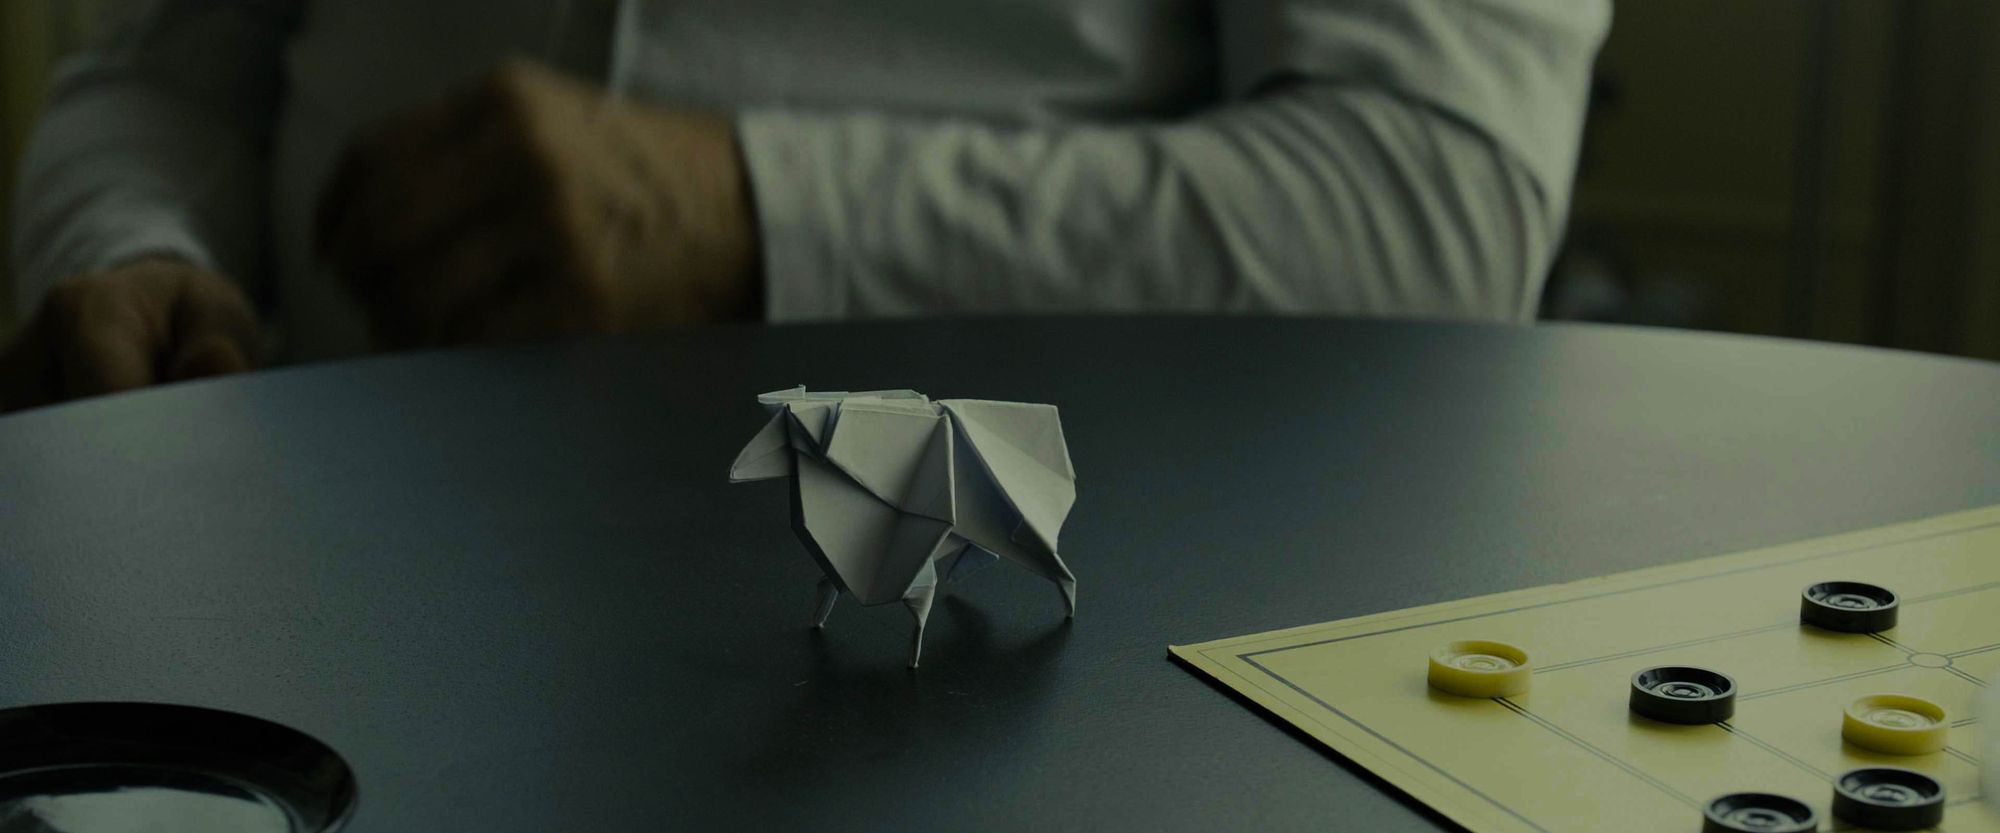 Table with a board game and origami sheep